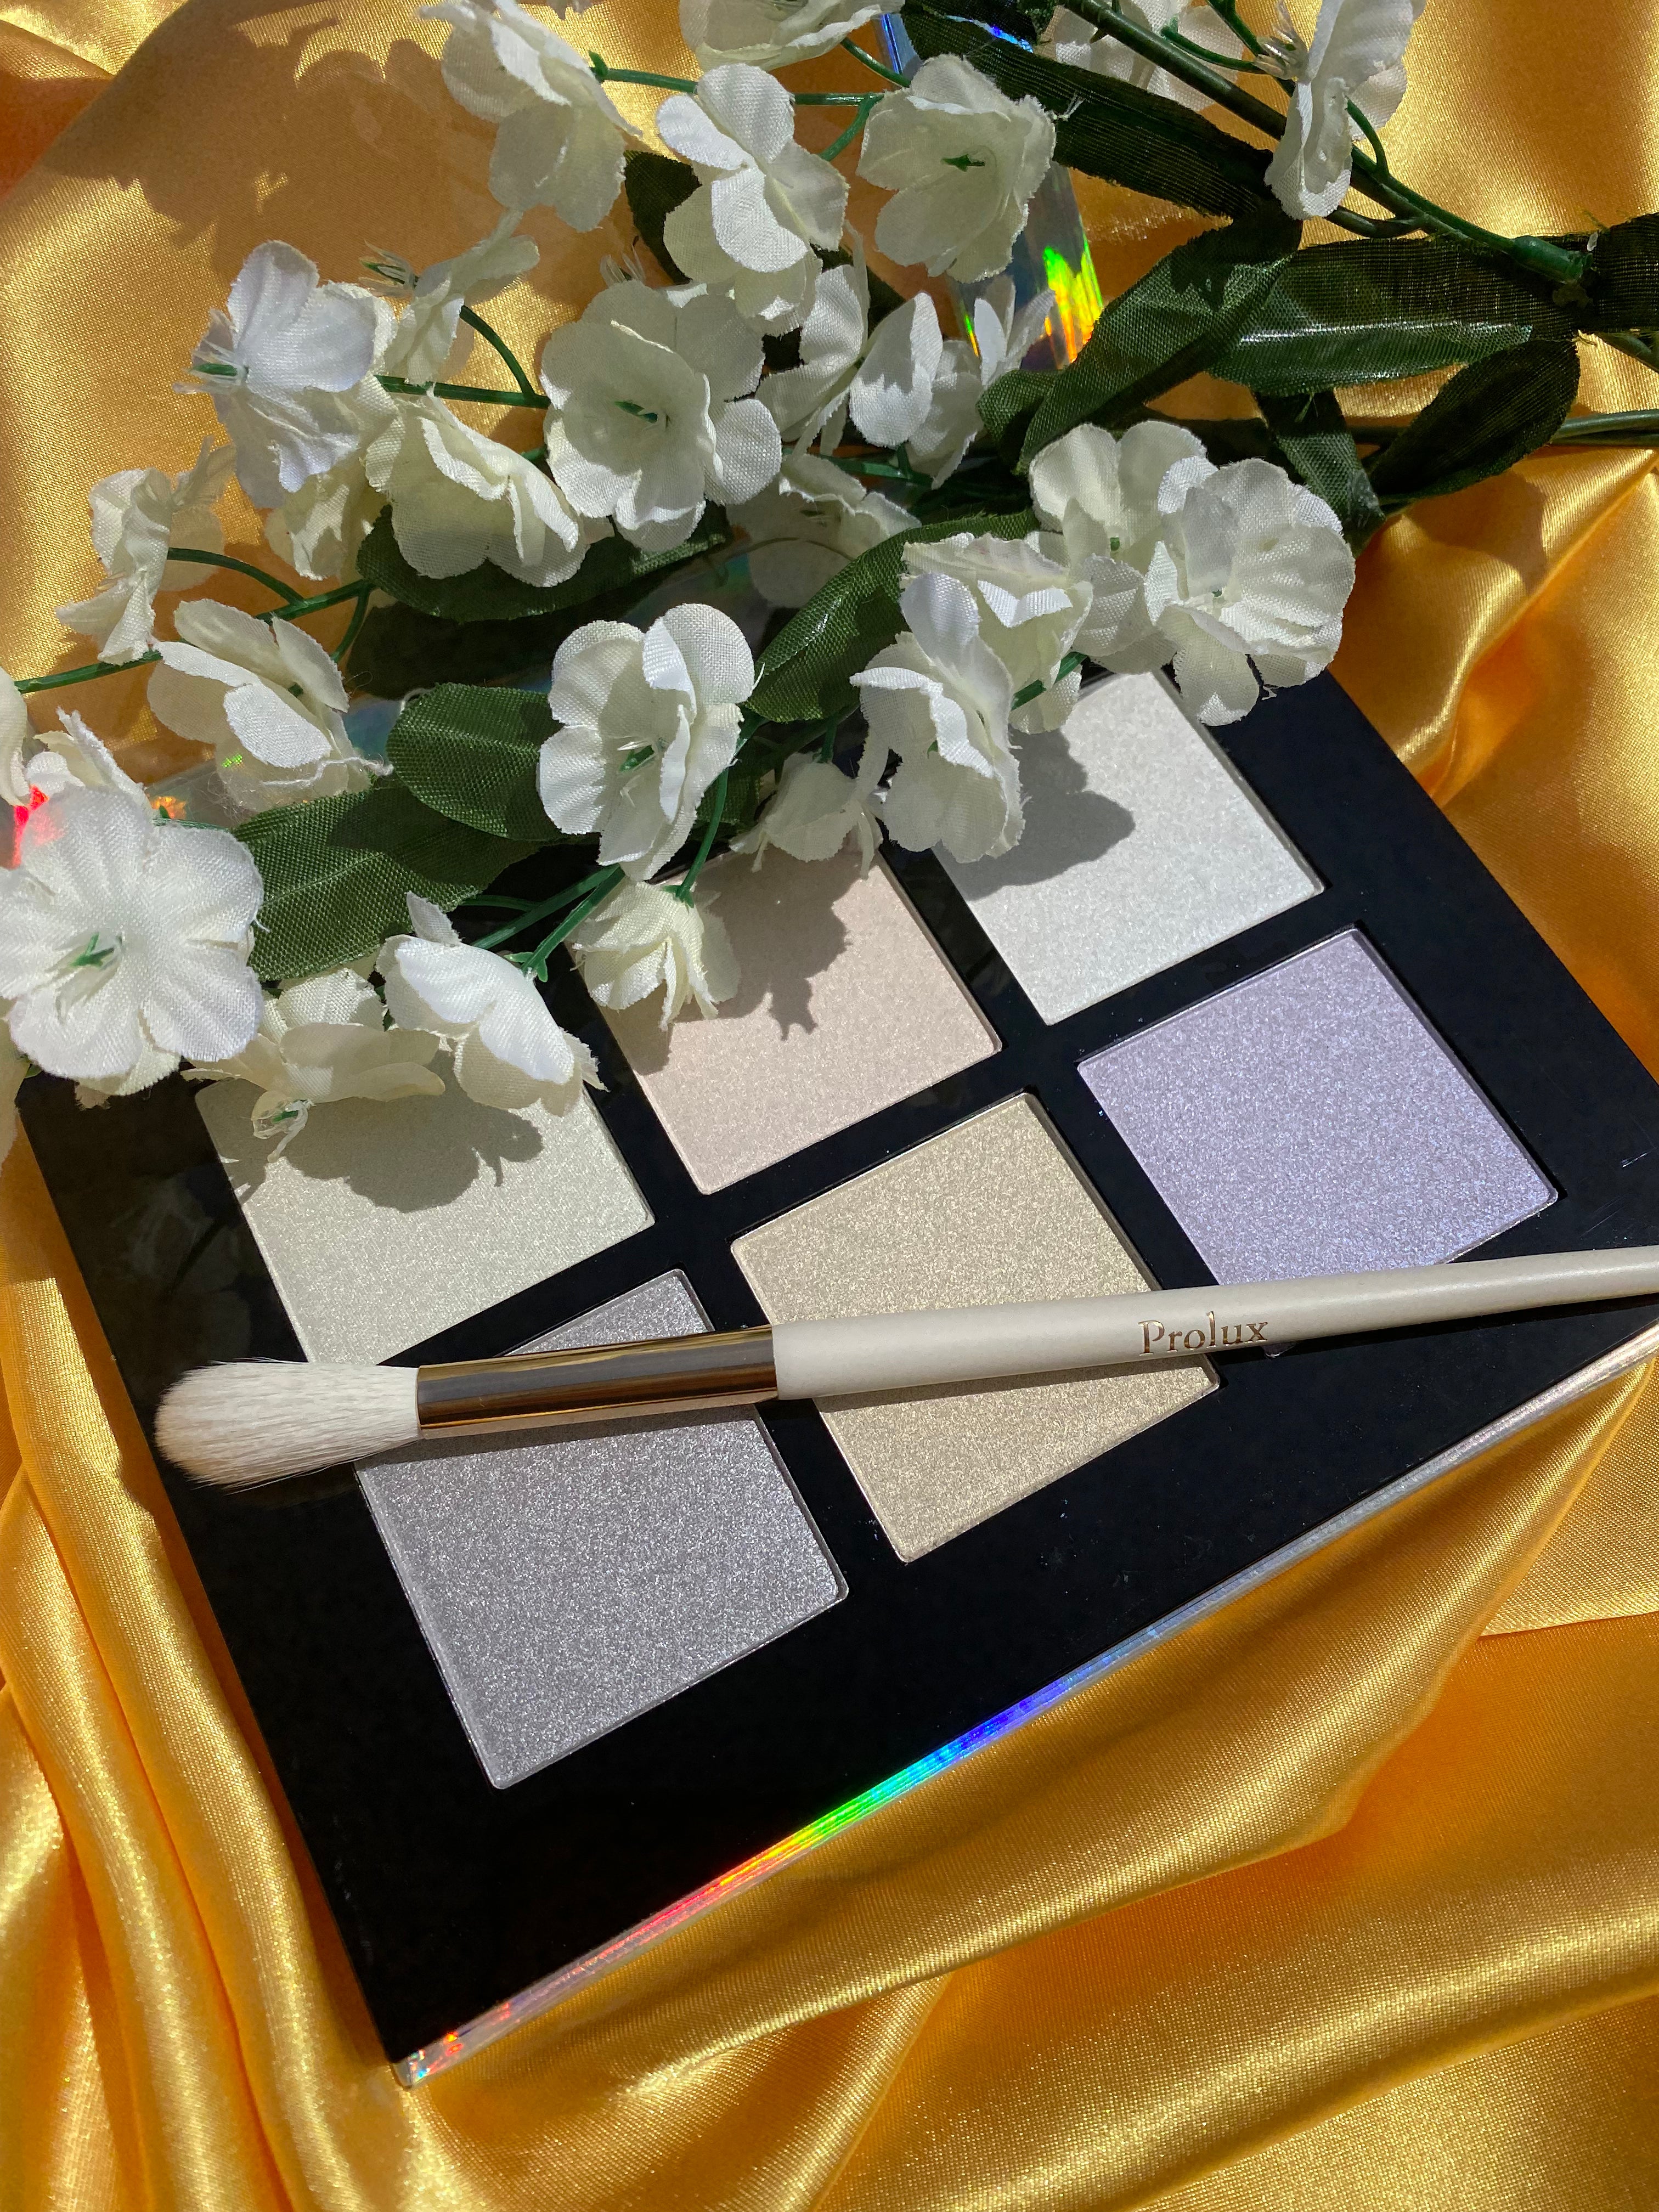 Holographic highlighter